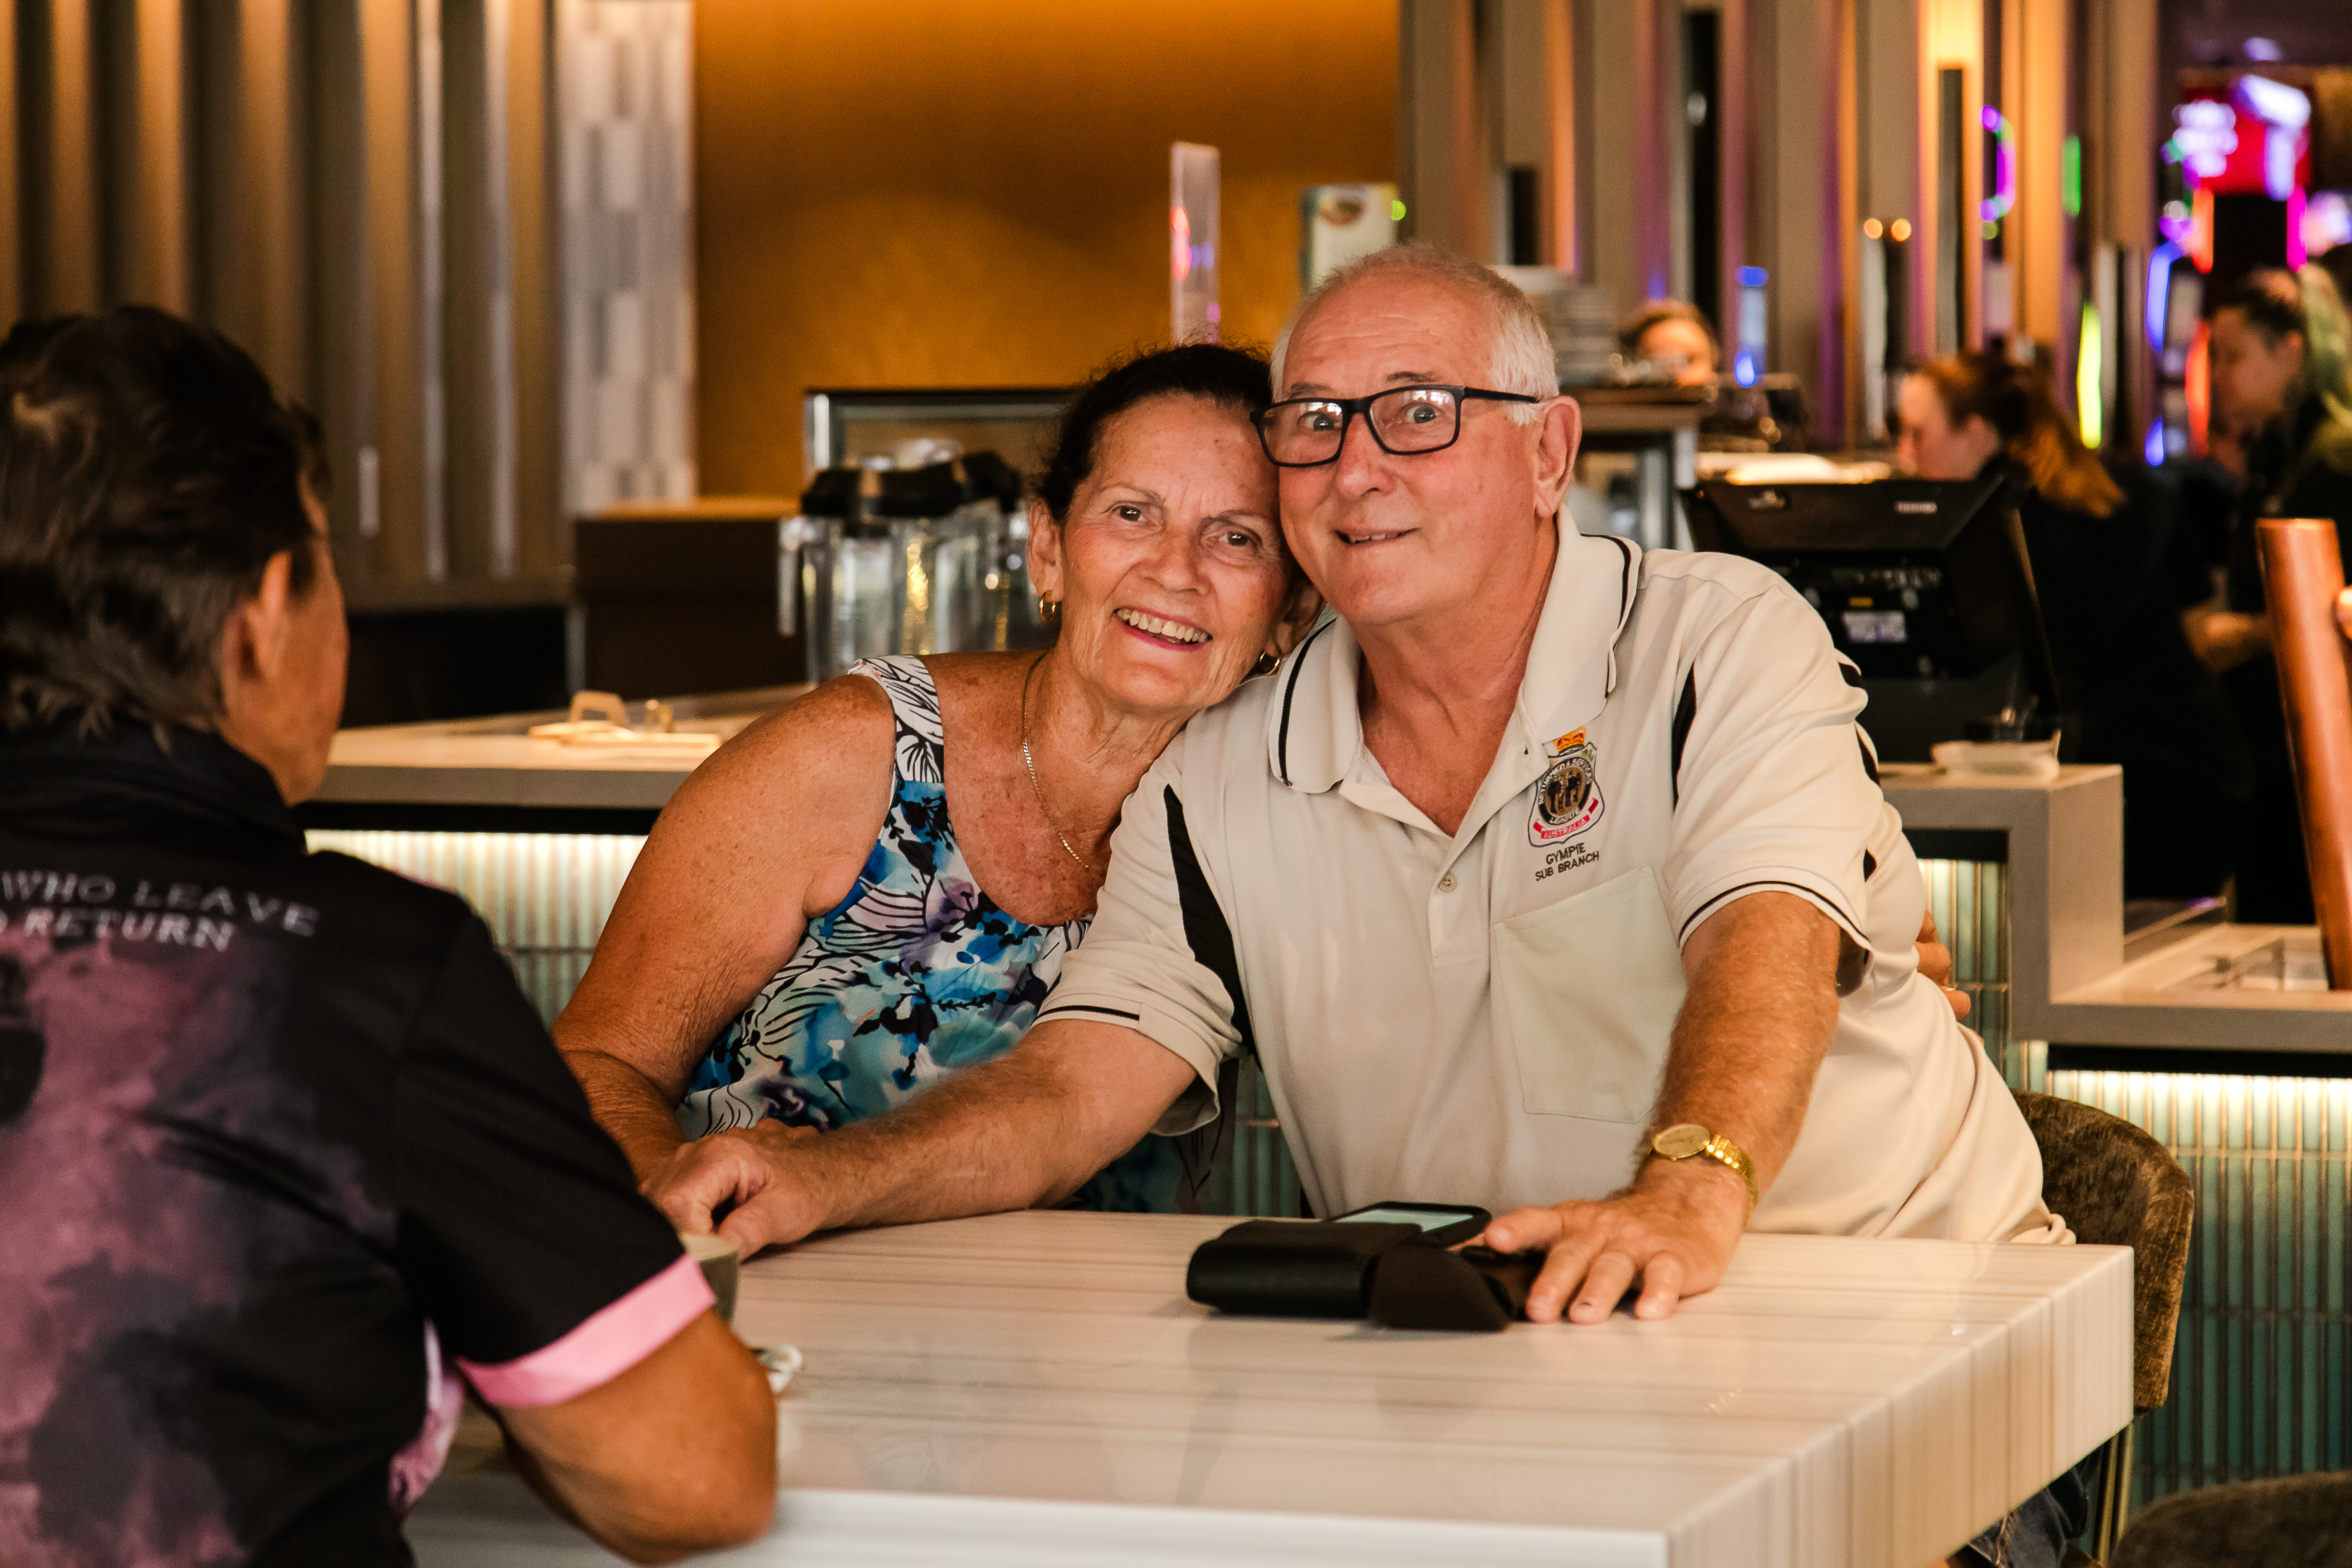 Introducing the Atrium Bistro at Gympie RSL